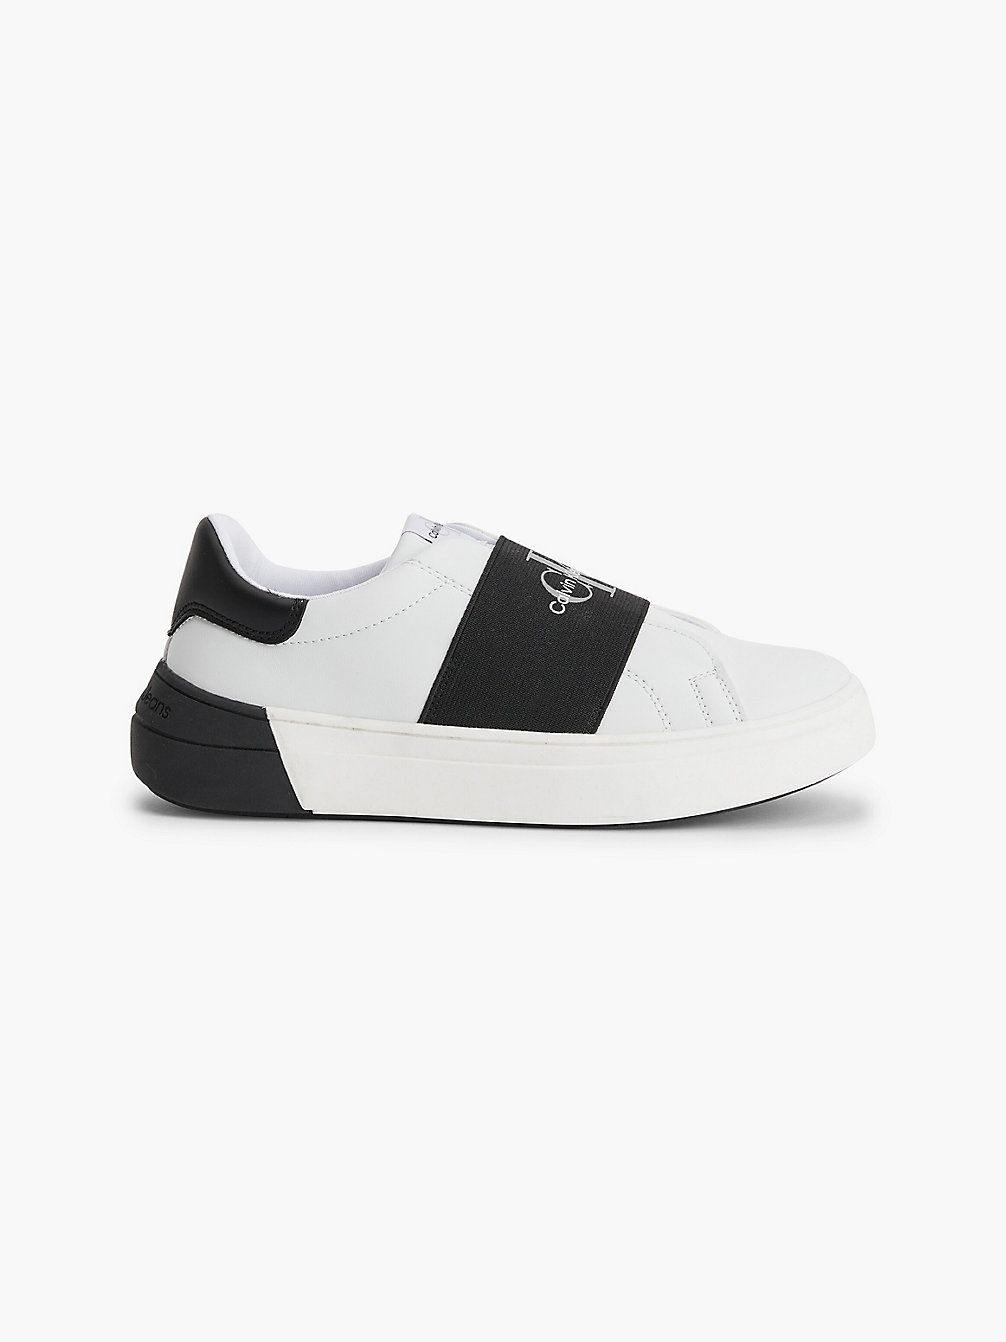 WHITE/BLACK Recycled Trainers undefined kids unisex Calvin Klein